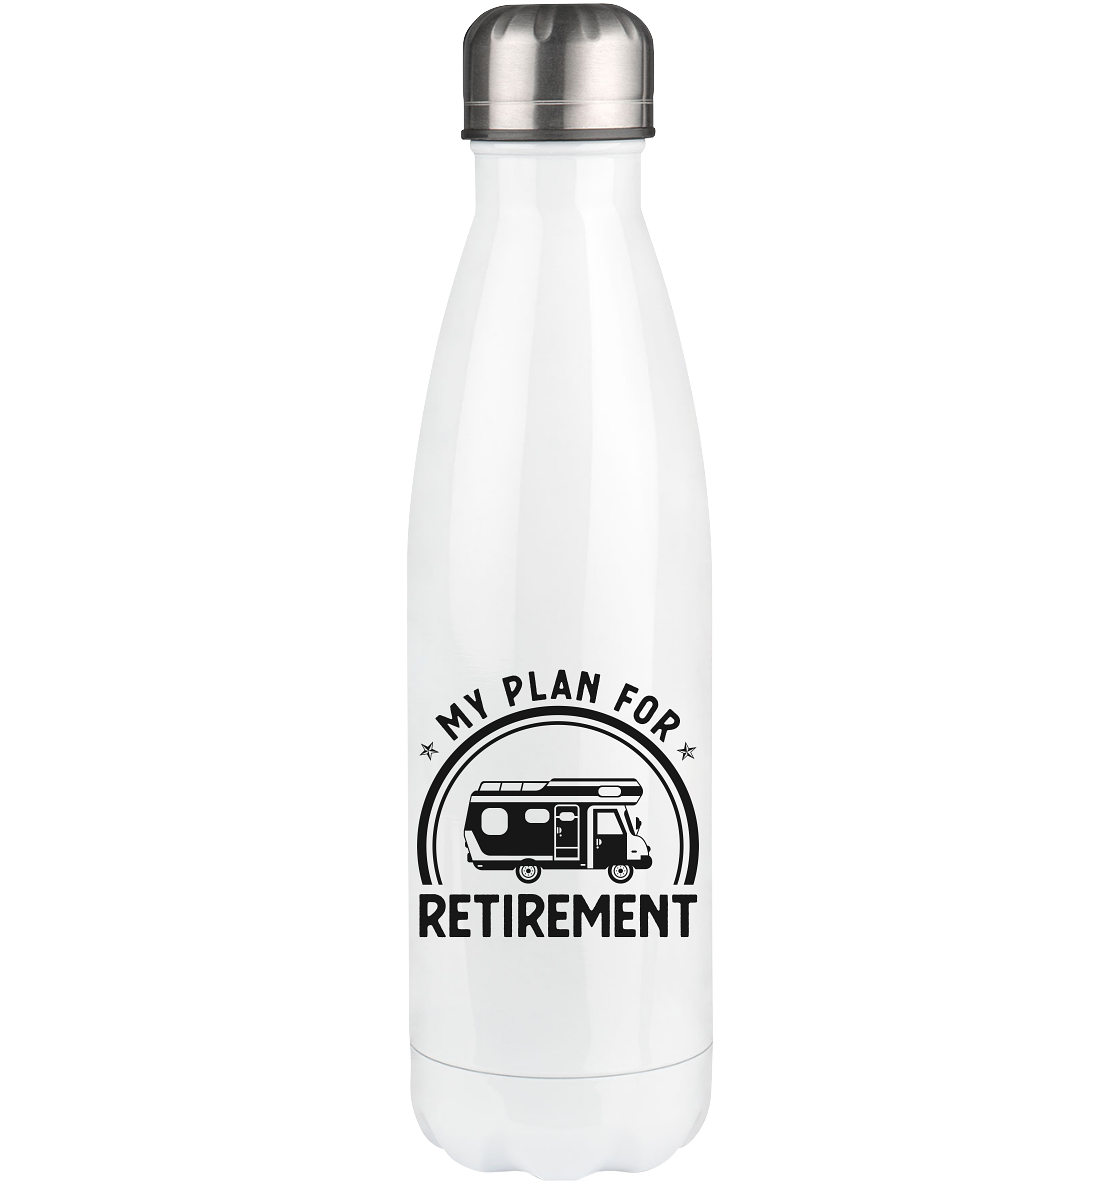 My Plan For Retirement - Edelstahl Thermosflasche camping UONP 500ml